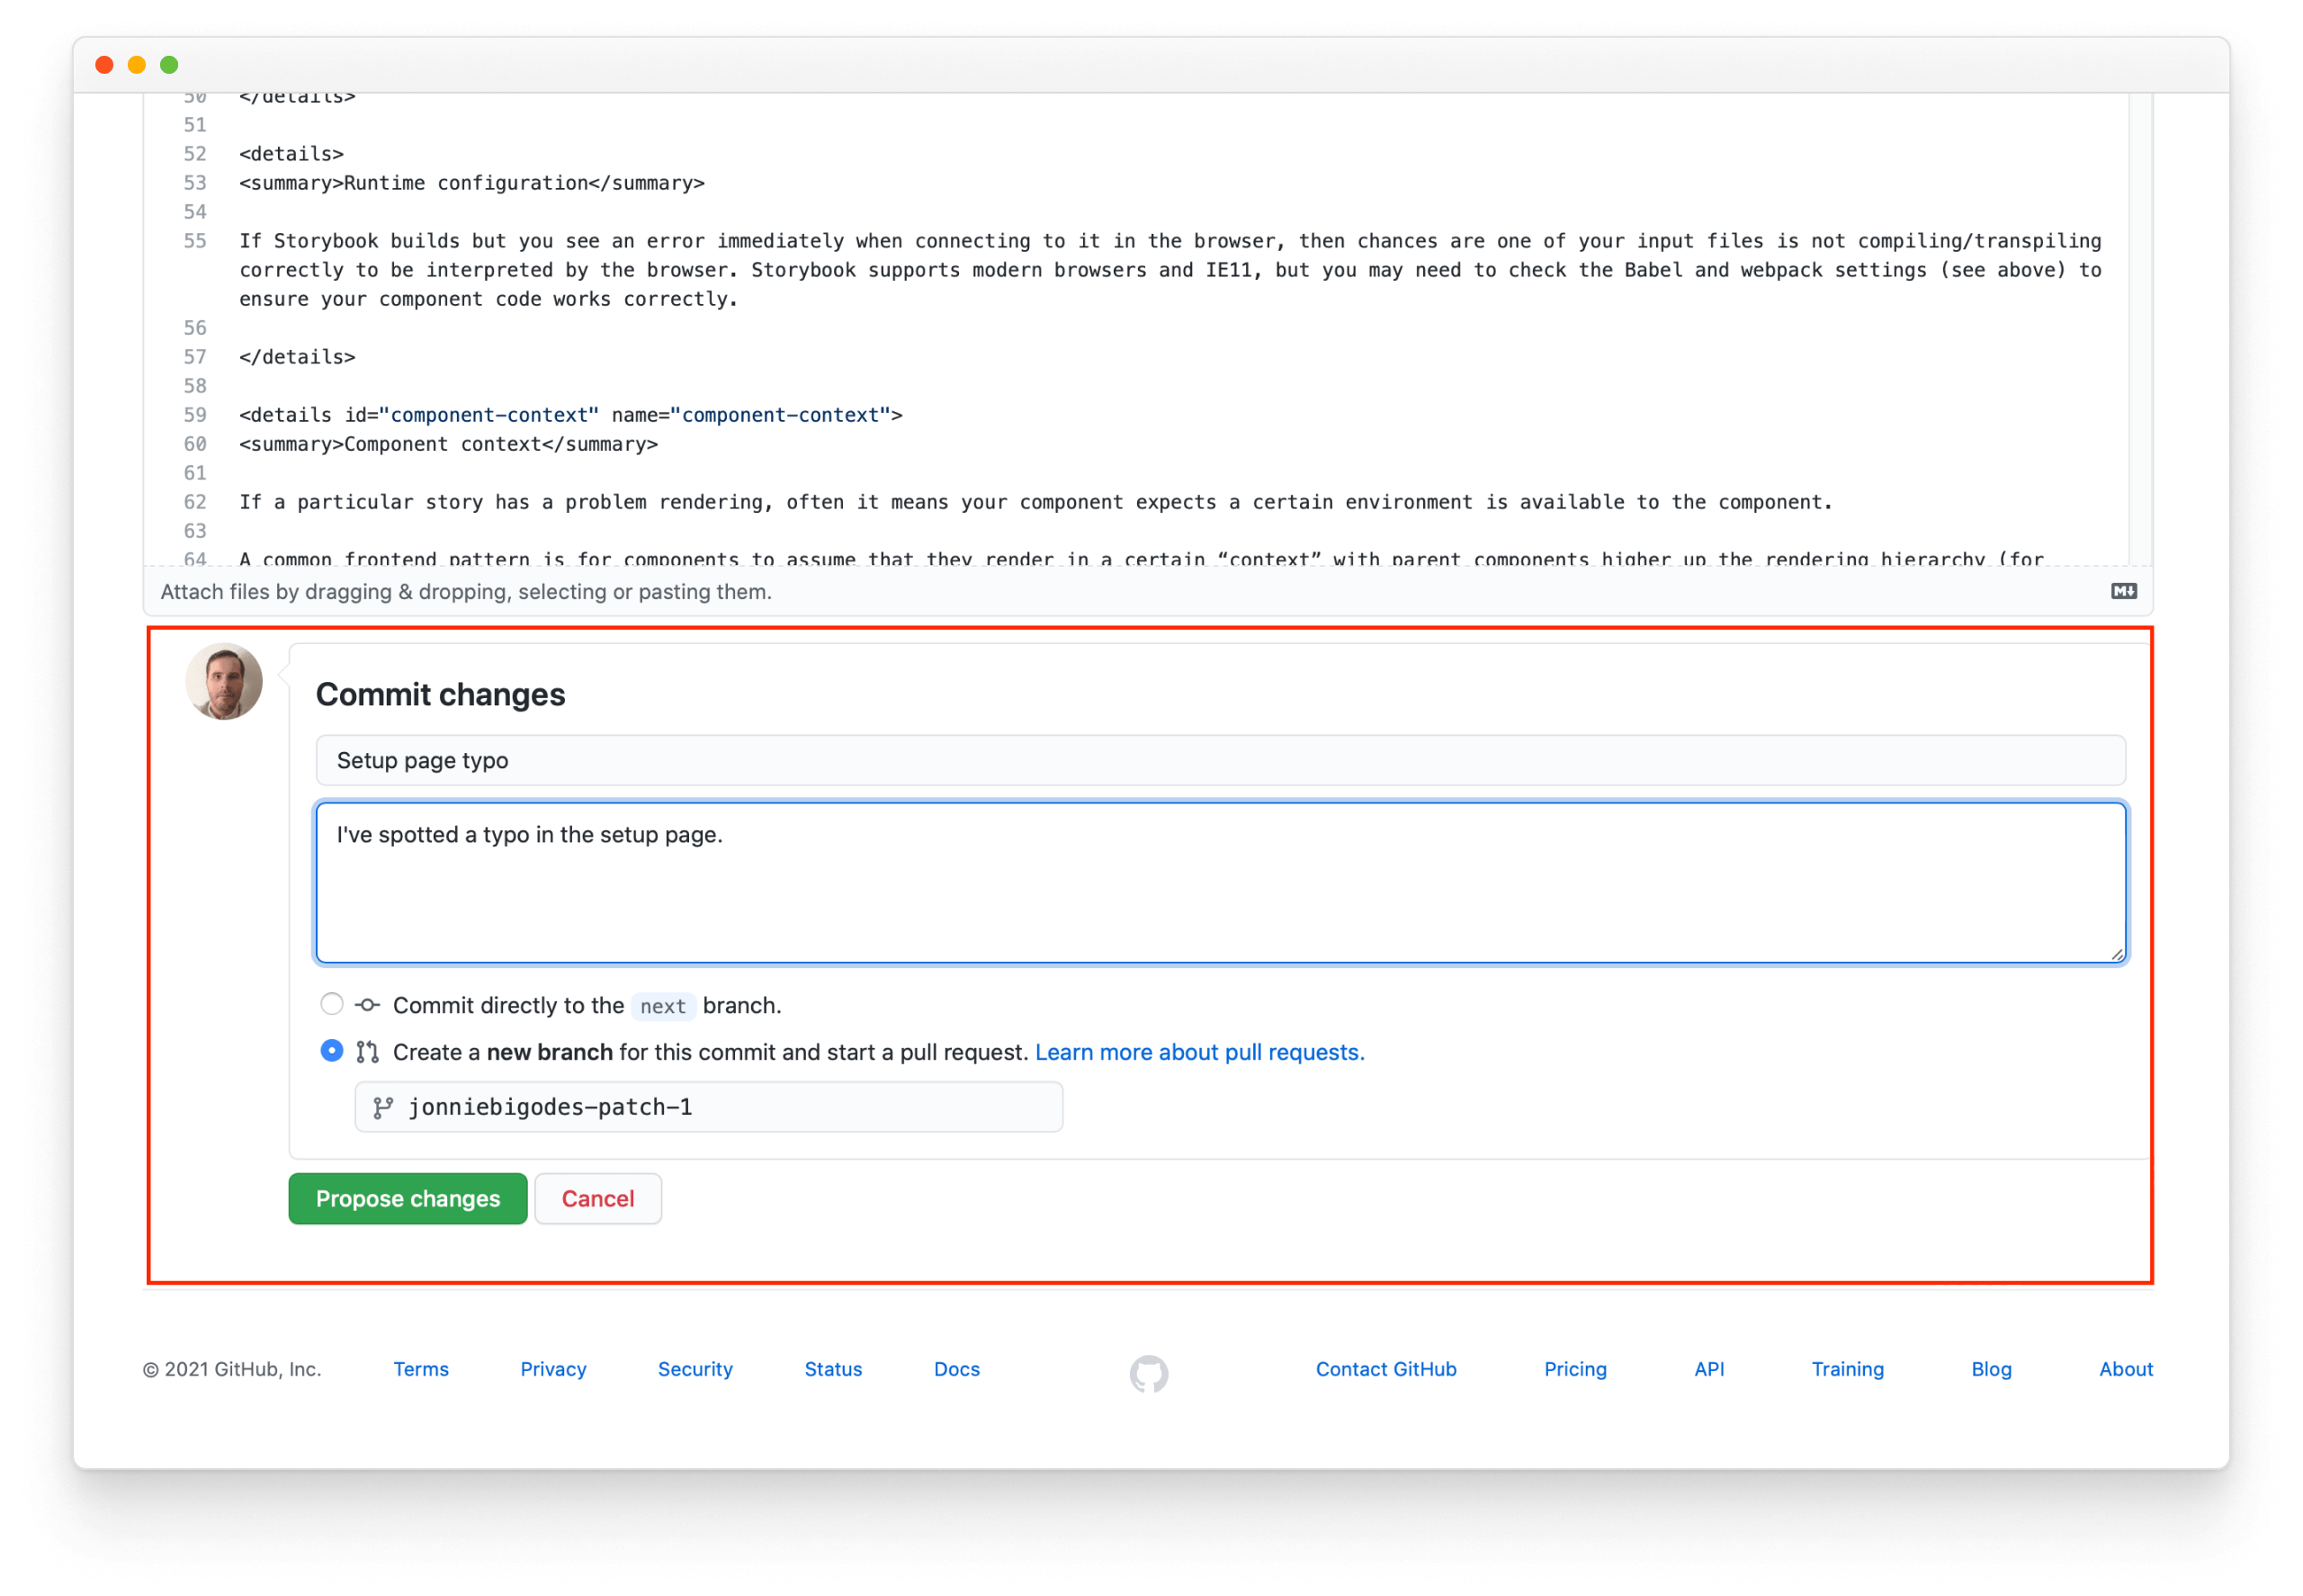 Fill the commit information